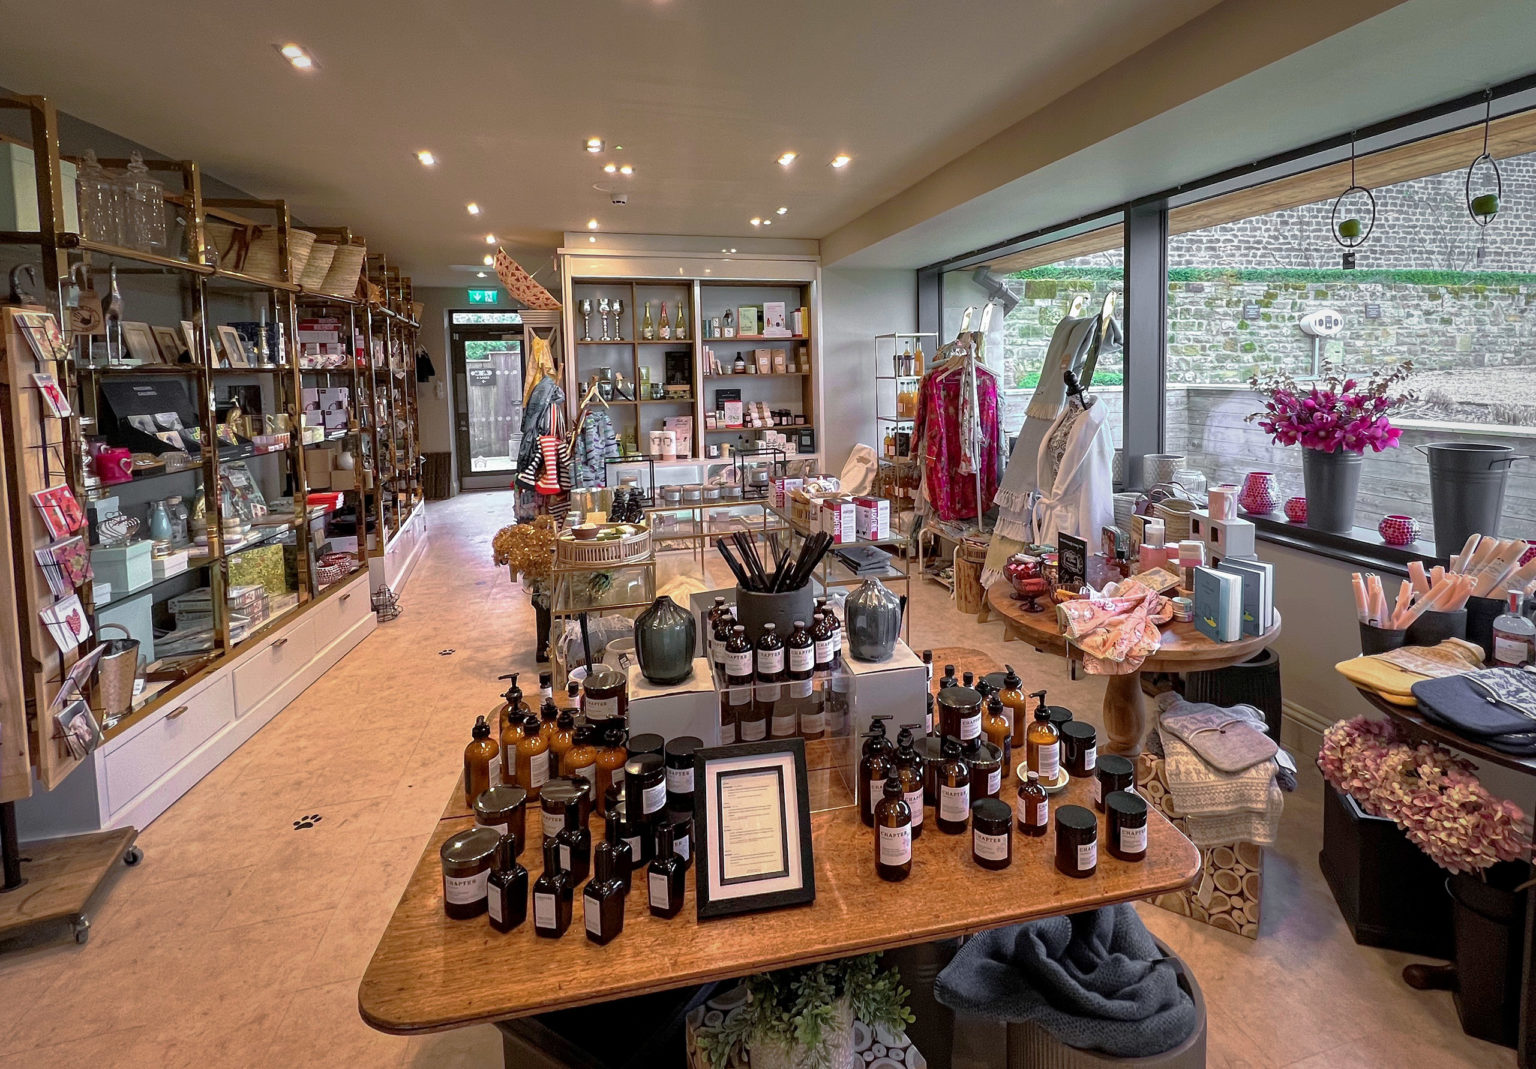 The gift shop at Swinton Estate